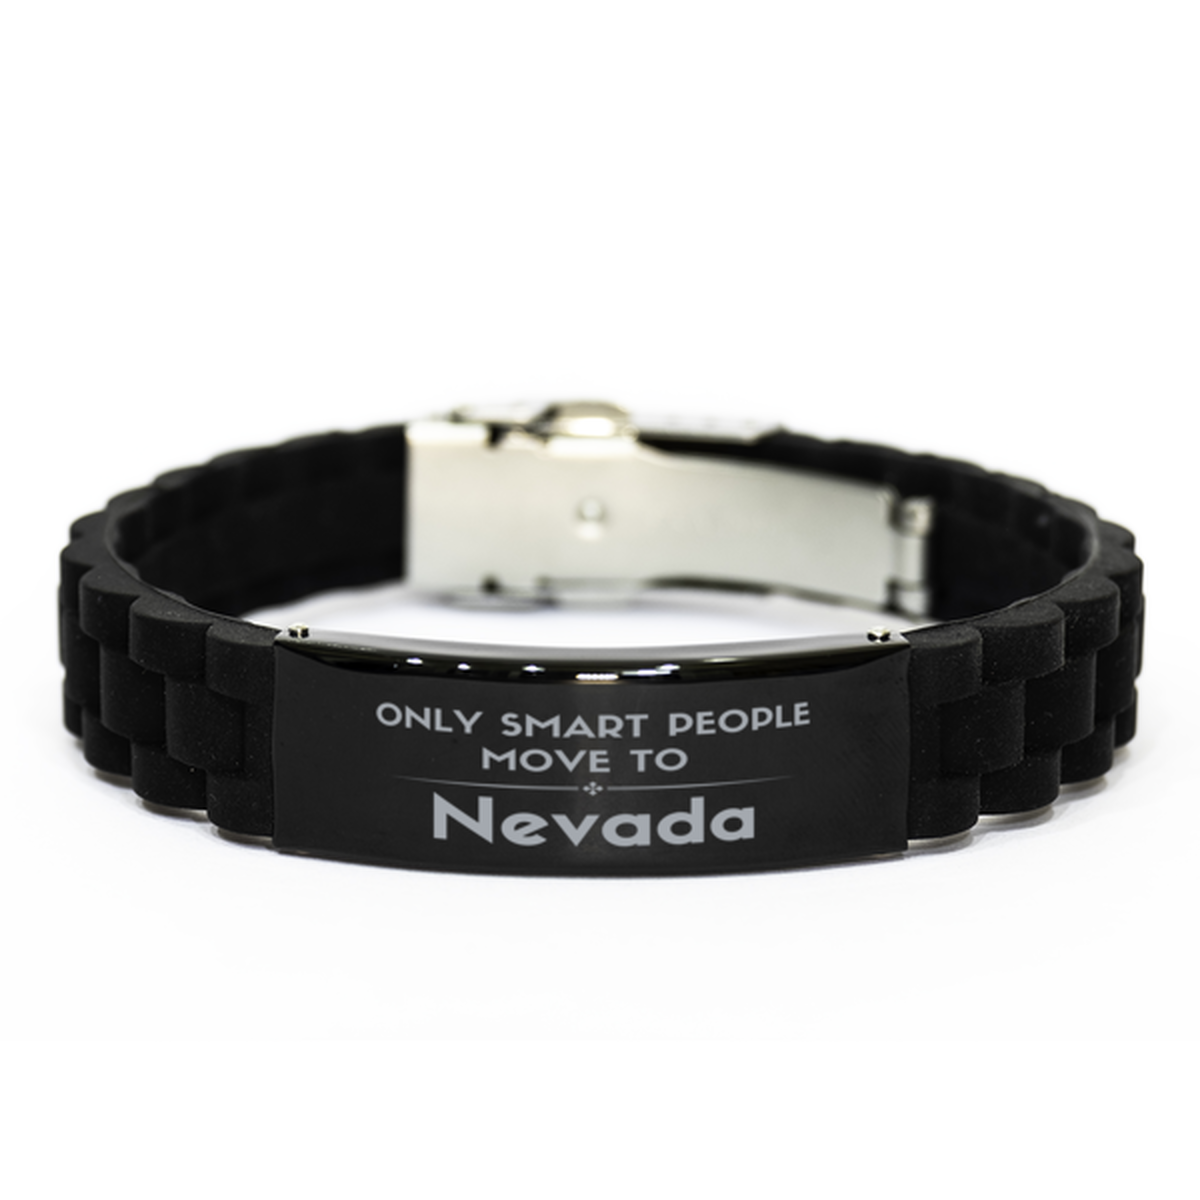 Only smart people move to Nevada Black Glidelock Clasp Bracelet, Gag Gifts For Nevada, Move to Nevada Gifts for Friends Coworker Funny Saying Quote